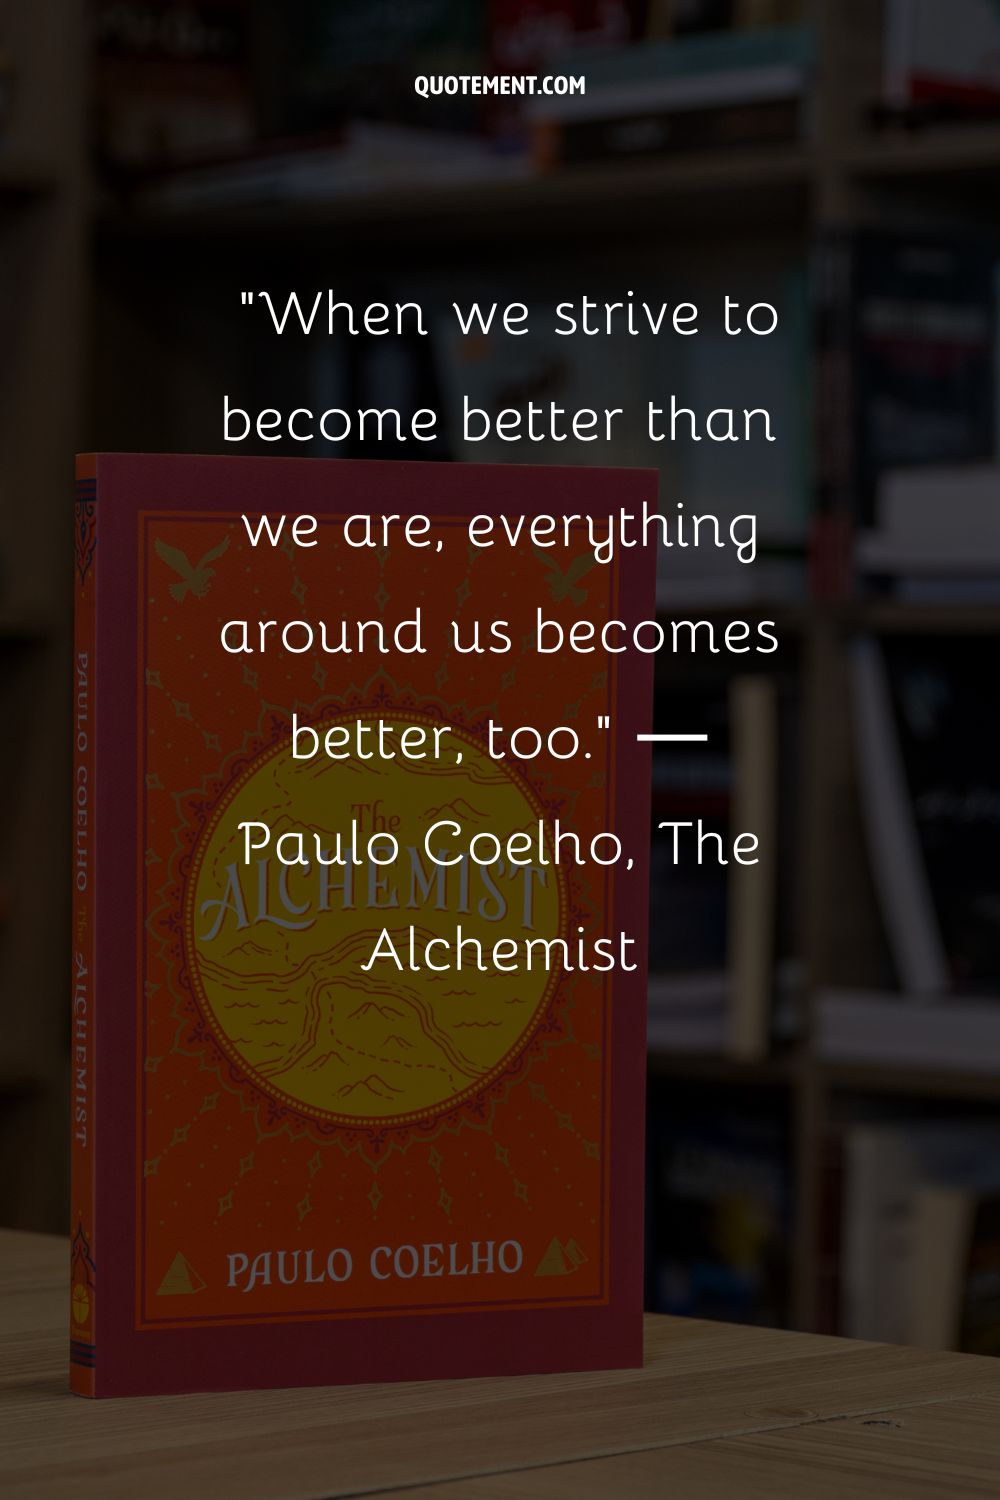 When we strive to become better than we are, everything around us becomes better, too